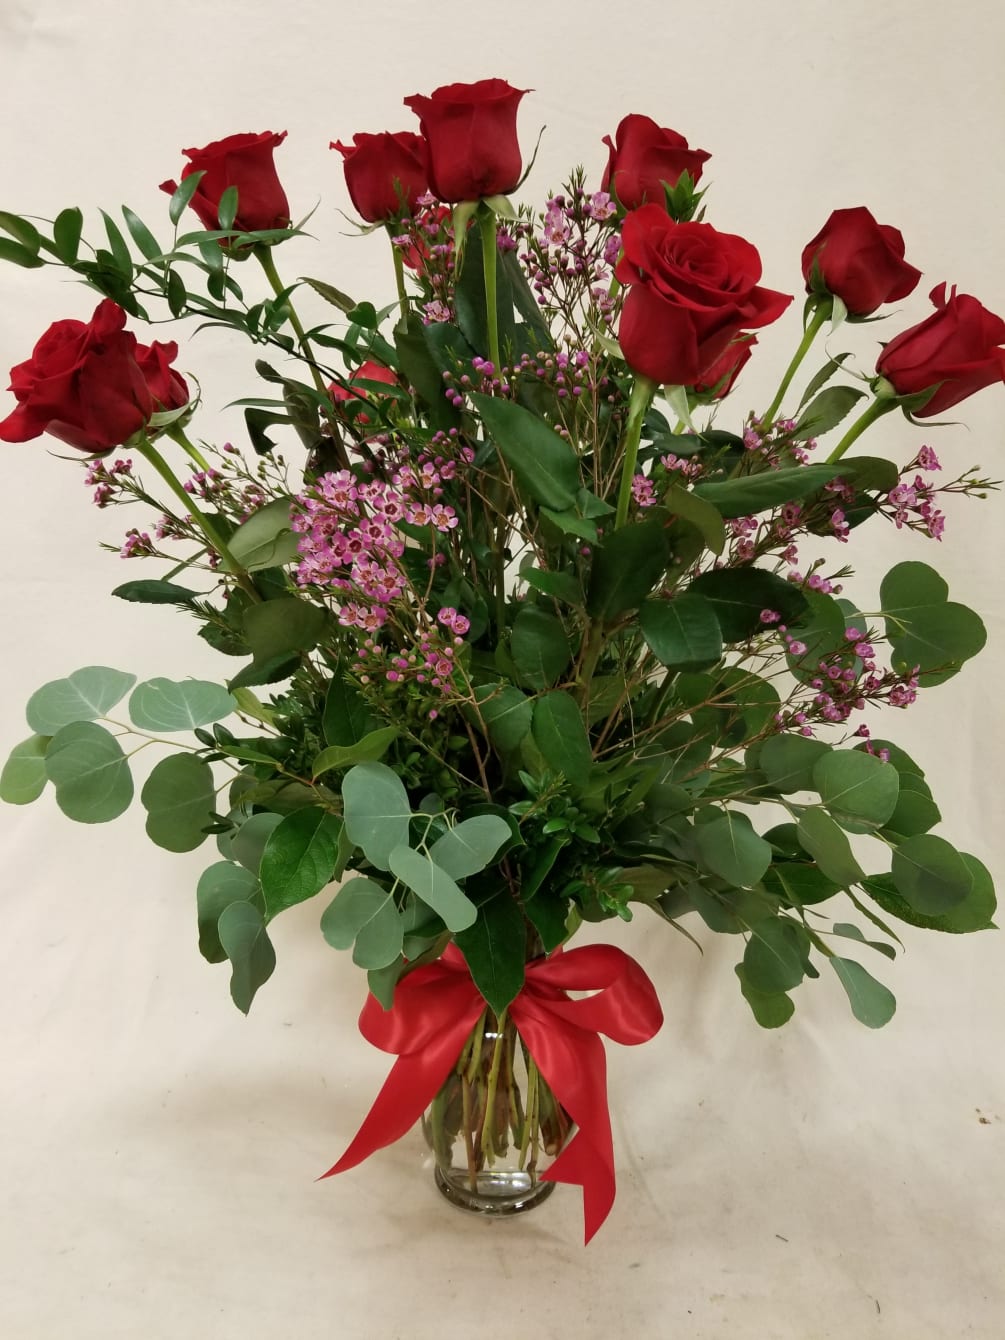 Twelve perfect roses, arranged in a clear glass vase. Premium foliage and